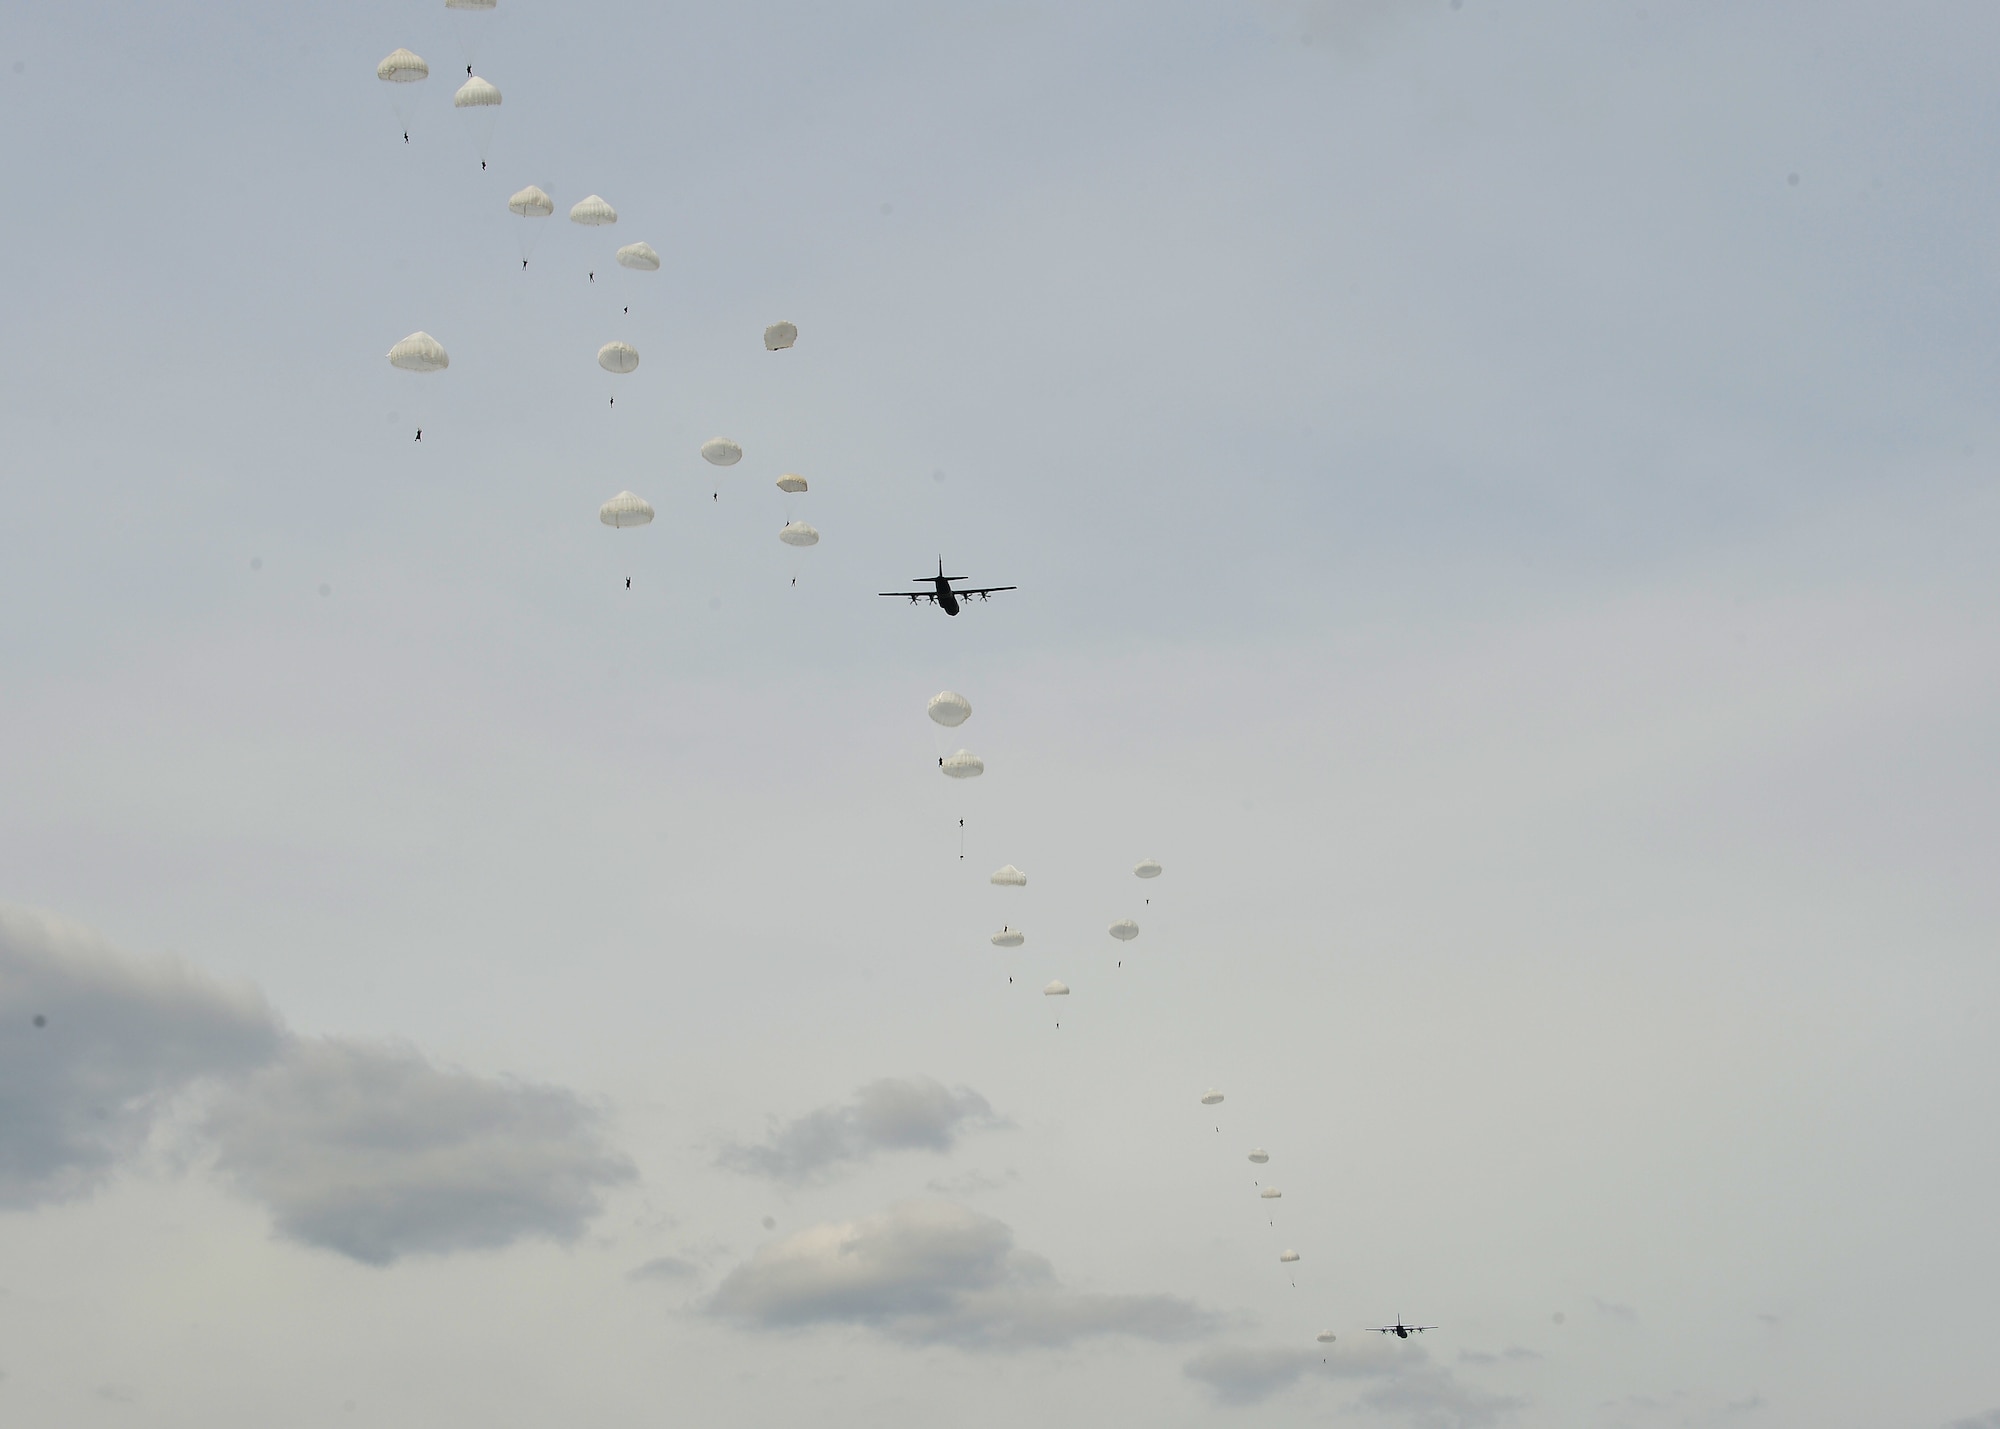 Polish paratroopers jump from U.S. Air Force C-130J Super Hercules aircraft over a drop zone in Poland, July 22, 2019. U.S. and Poland worked on interoperability during Aviation Rotation 19-3, a bilateral exercise aimed at improving partnership capacity, by performing aerial operations over Poland. (U.S. Air Force photo by Staff Sgt. Jimmie D. Pike)